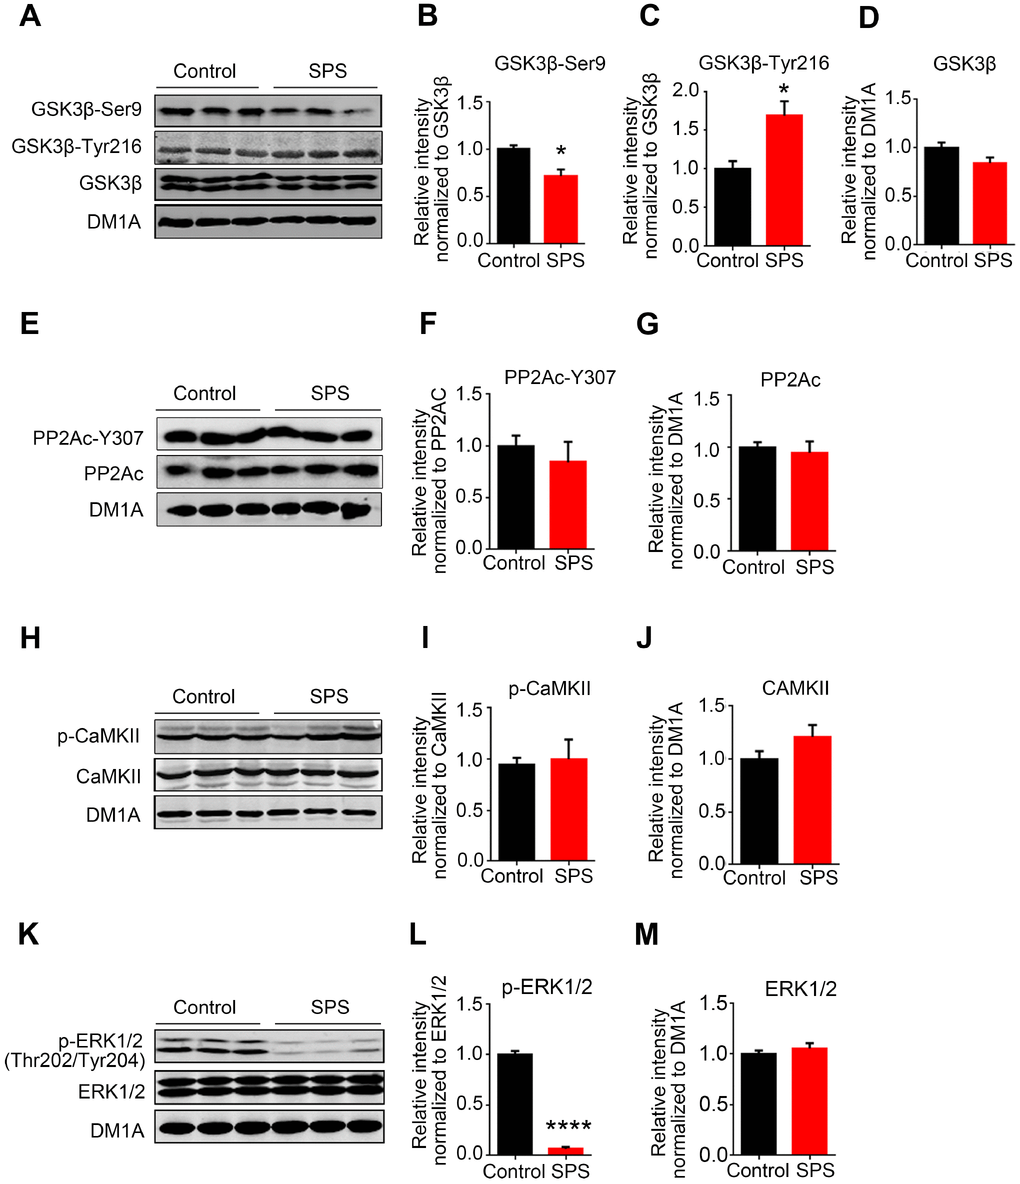 SPS modulates tau-related kinases not phosphatase. (A) The level of total and phosphorylated GSK3β at Ser9 and Tyr216 were measured by WB. (B and C) SPS rats showed a decreased phosphorylation of GSK3β at Ser9 (B) and a significant increase at Tyr216 (C). (D) Total GSK3β didn’t change compared with control. (E, F and G) WB showed no changes in the levels of both PP2Ac and phosphor-PP2Ac-Y307. (H, I and J) CaMKII and p- CaMKII were detected by Western blot and showed no significant difference. (K, L and M) The level of p-ERK1/2 was significantly decreased in SPS rats and total ERK1/2 showed no changes compared with control. All data represent mean ± SEM, n=3, *P 